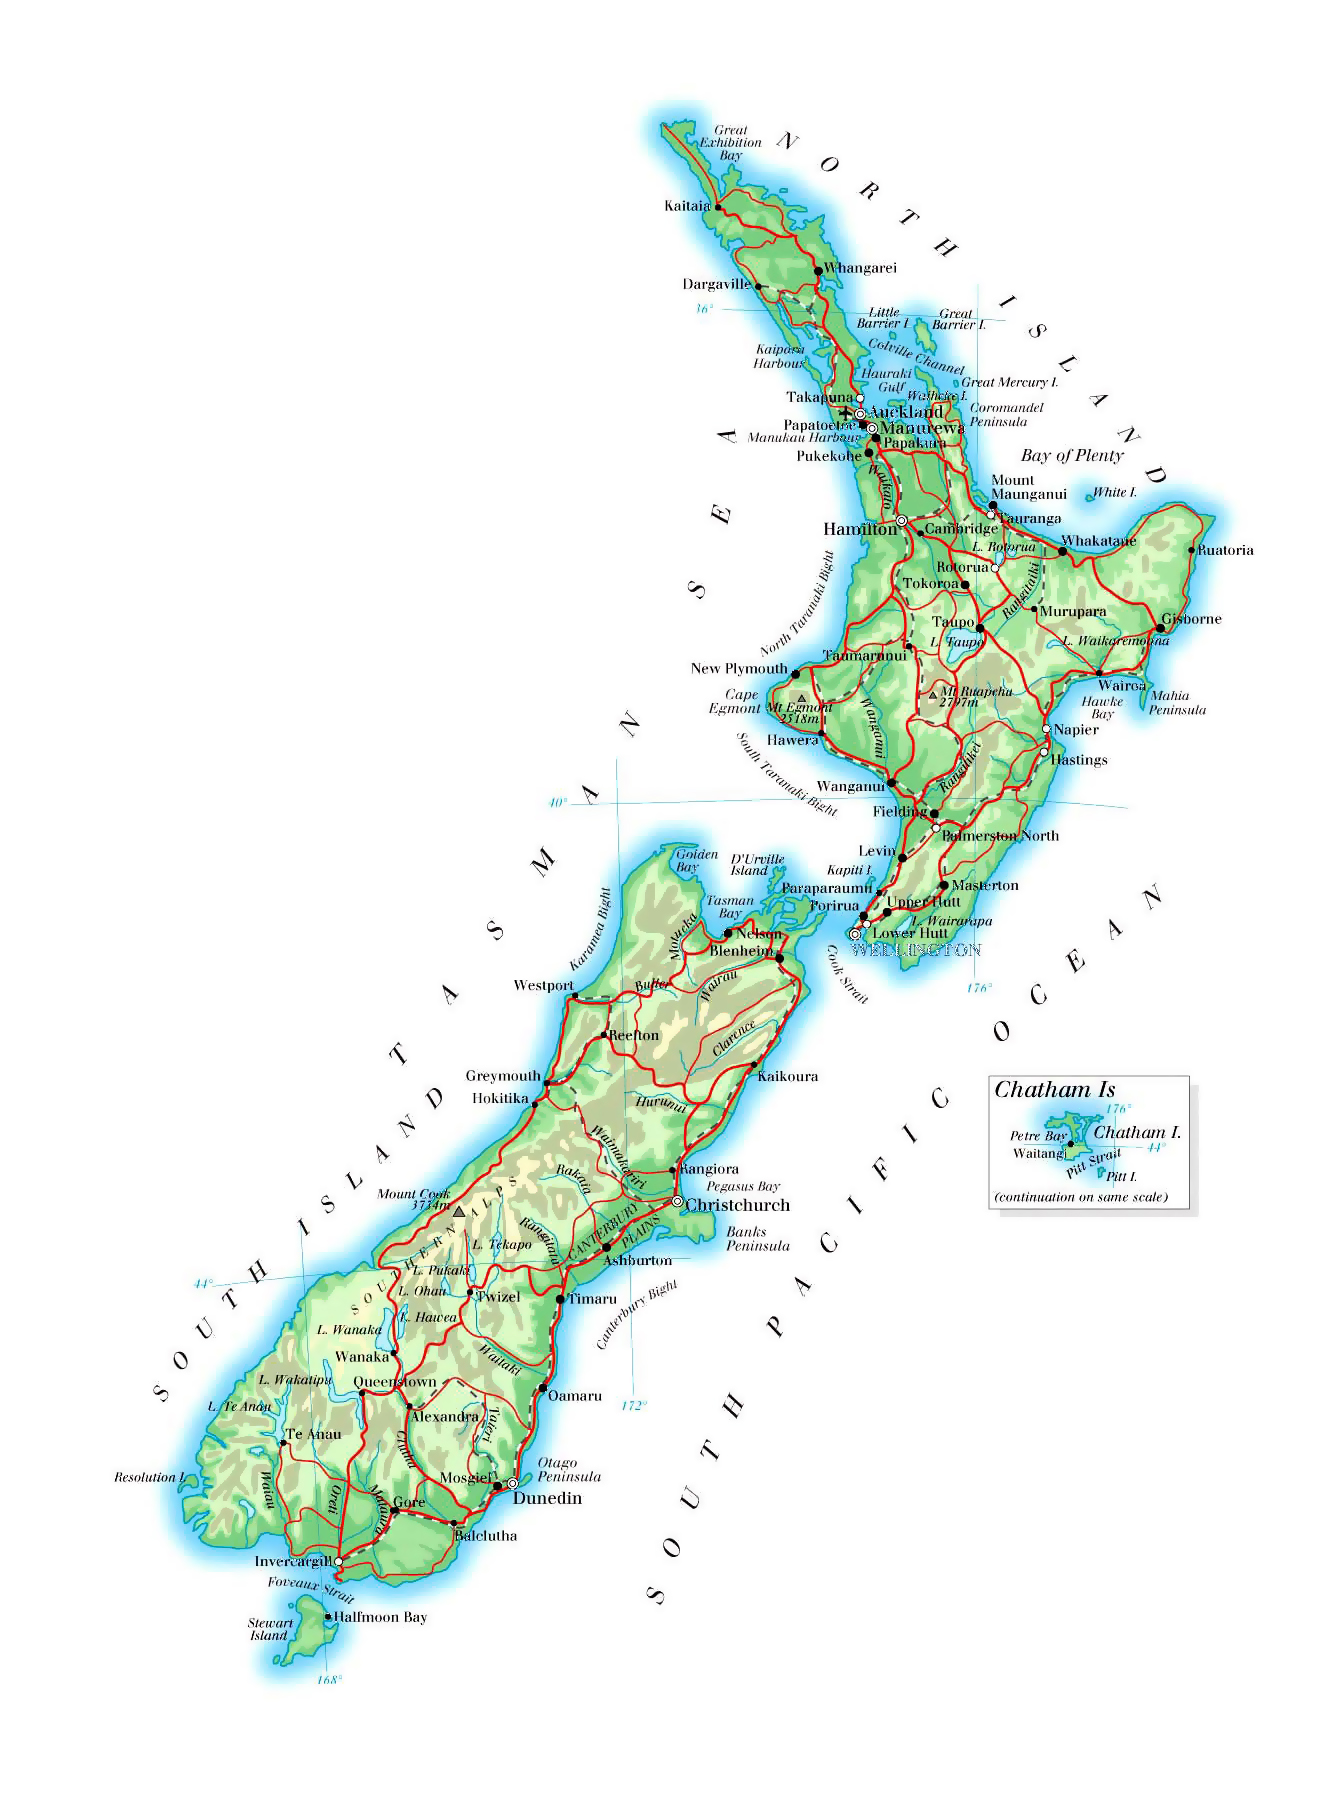 Large Elevation Map Of New Zealand With Roads Railroads Cities